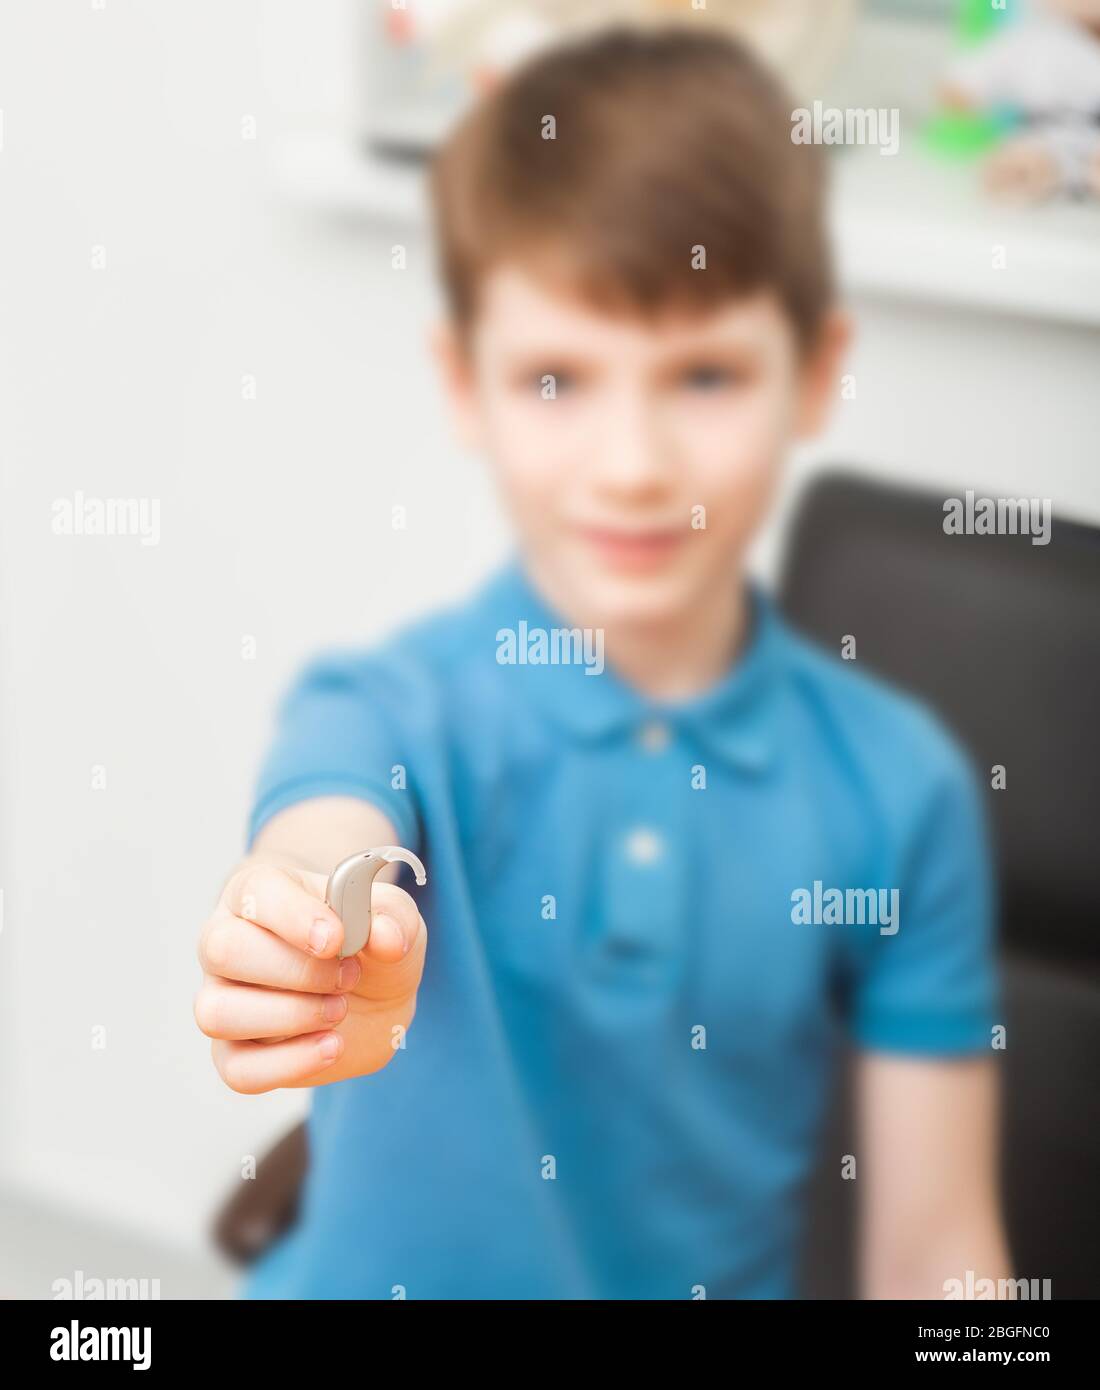 Child holding in his hand a hearing aid that will help him hear the sounds of the world. Hearing aid close-up Stock Photo